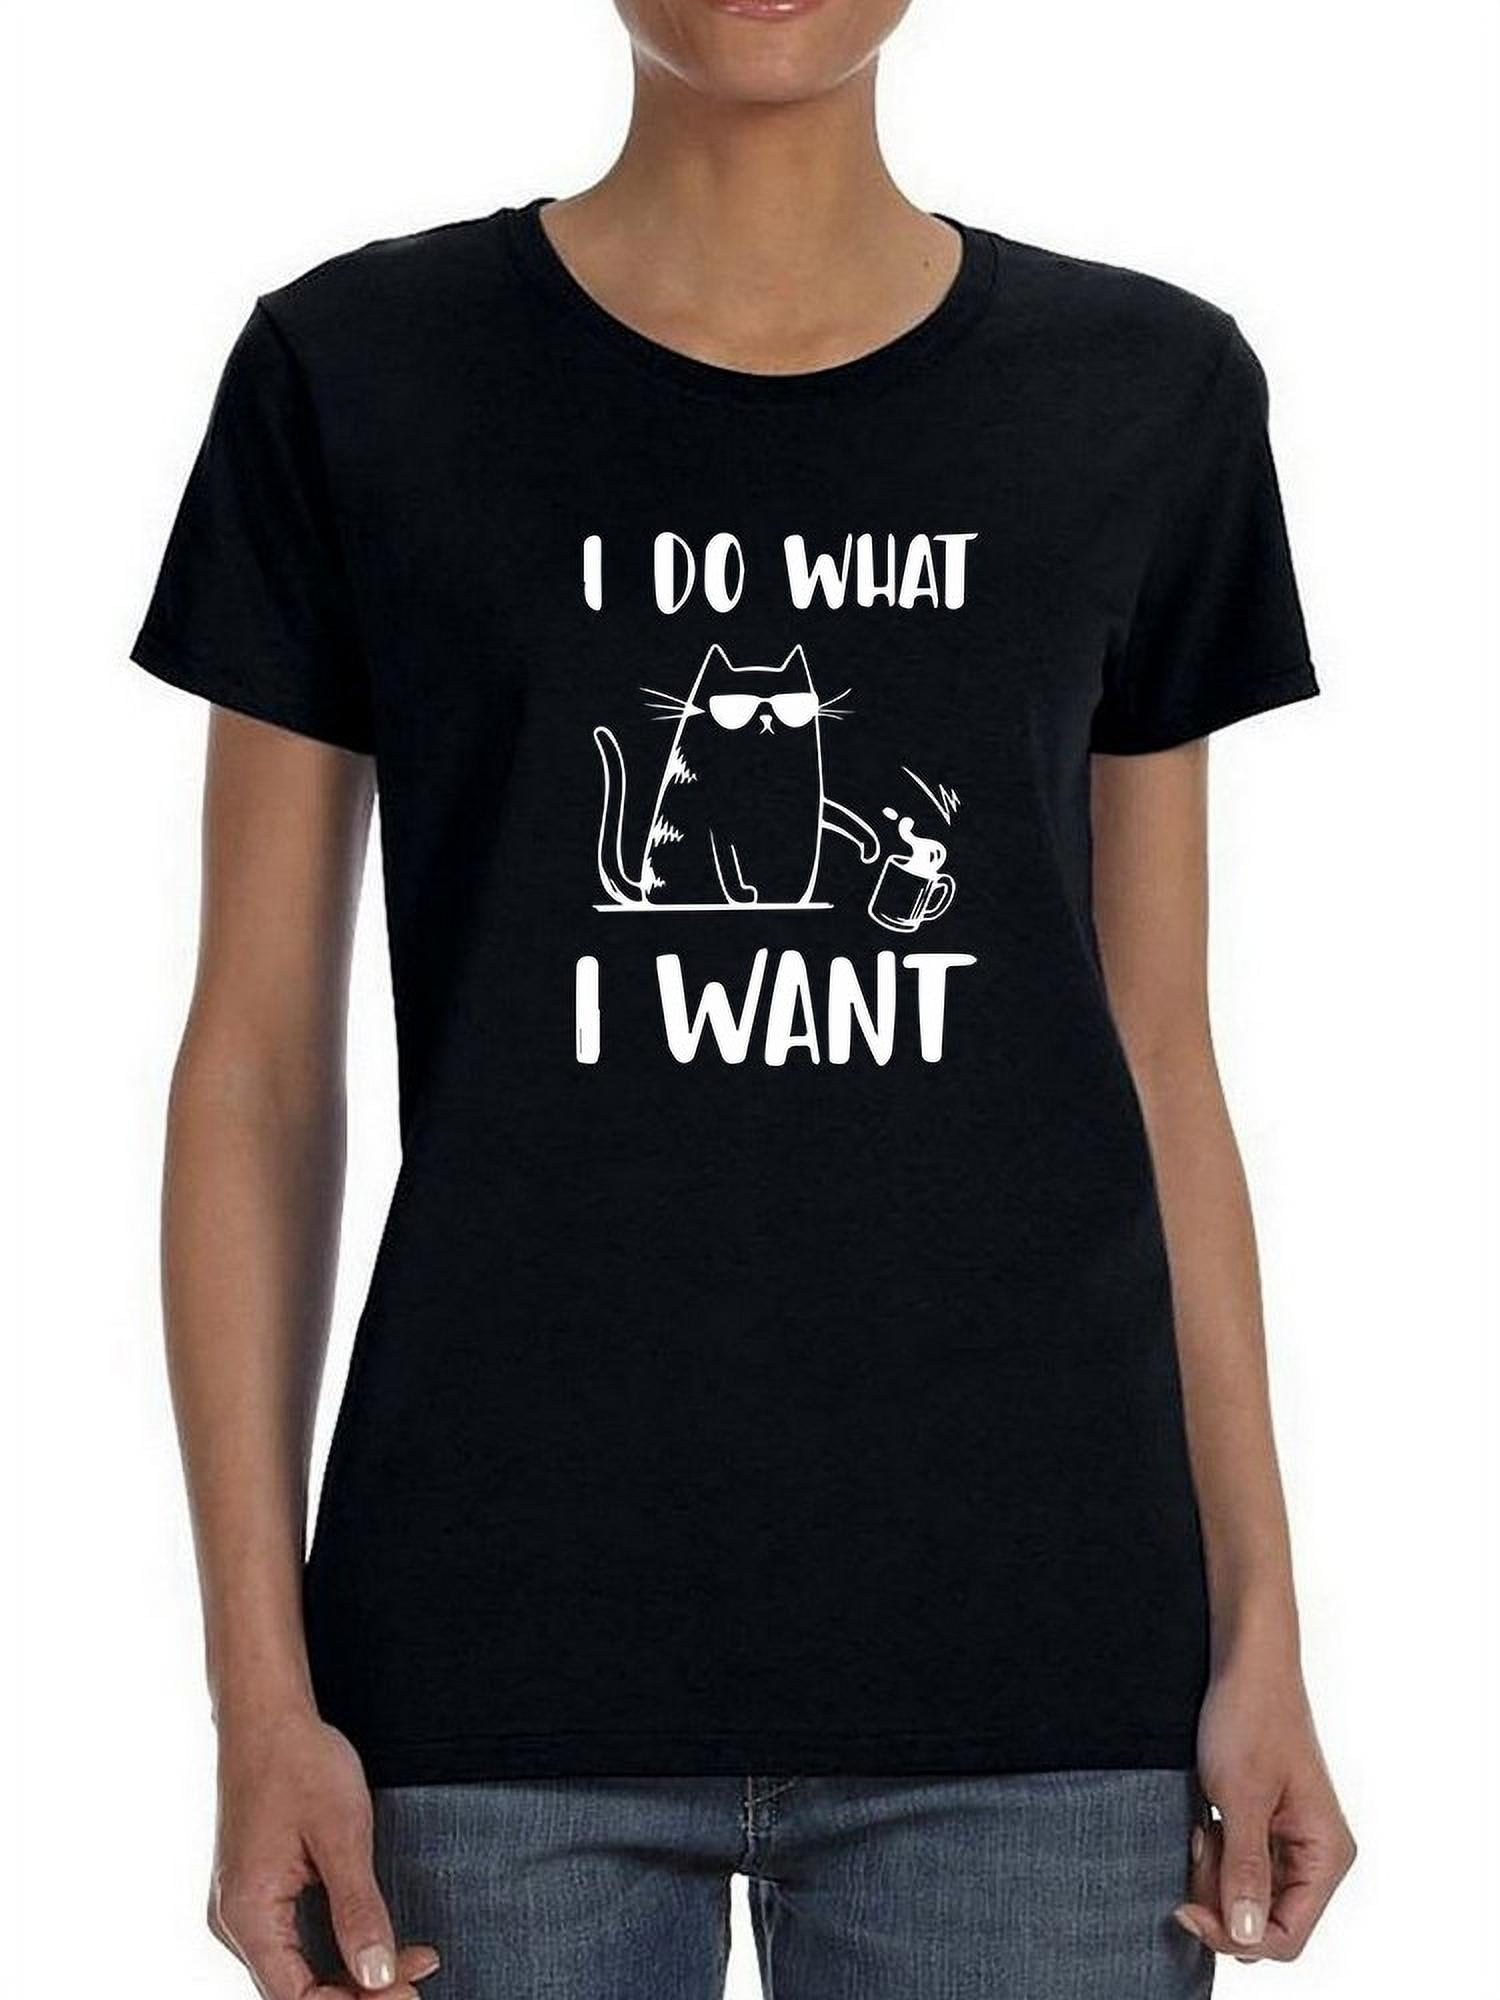 I wish I was a Cat Funny gym t shirt  gift mens womens  fitness tee novelty 